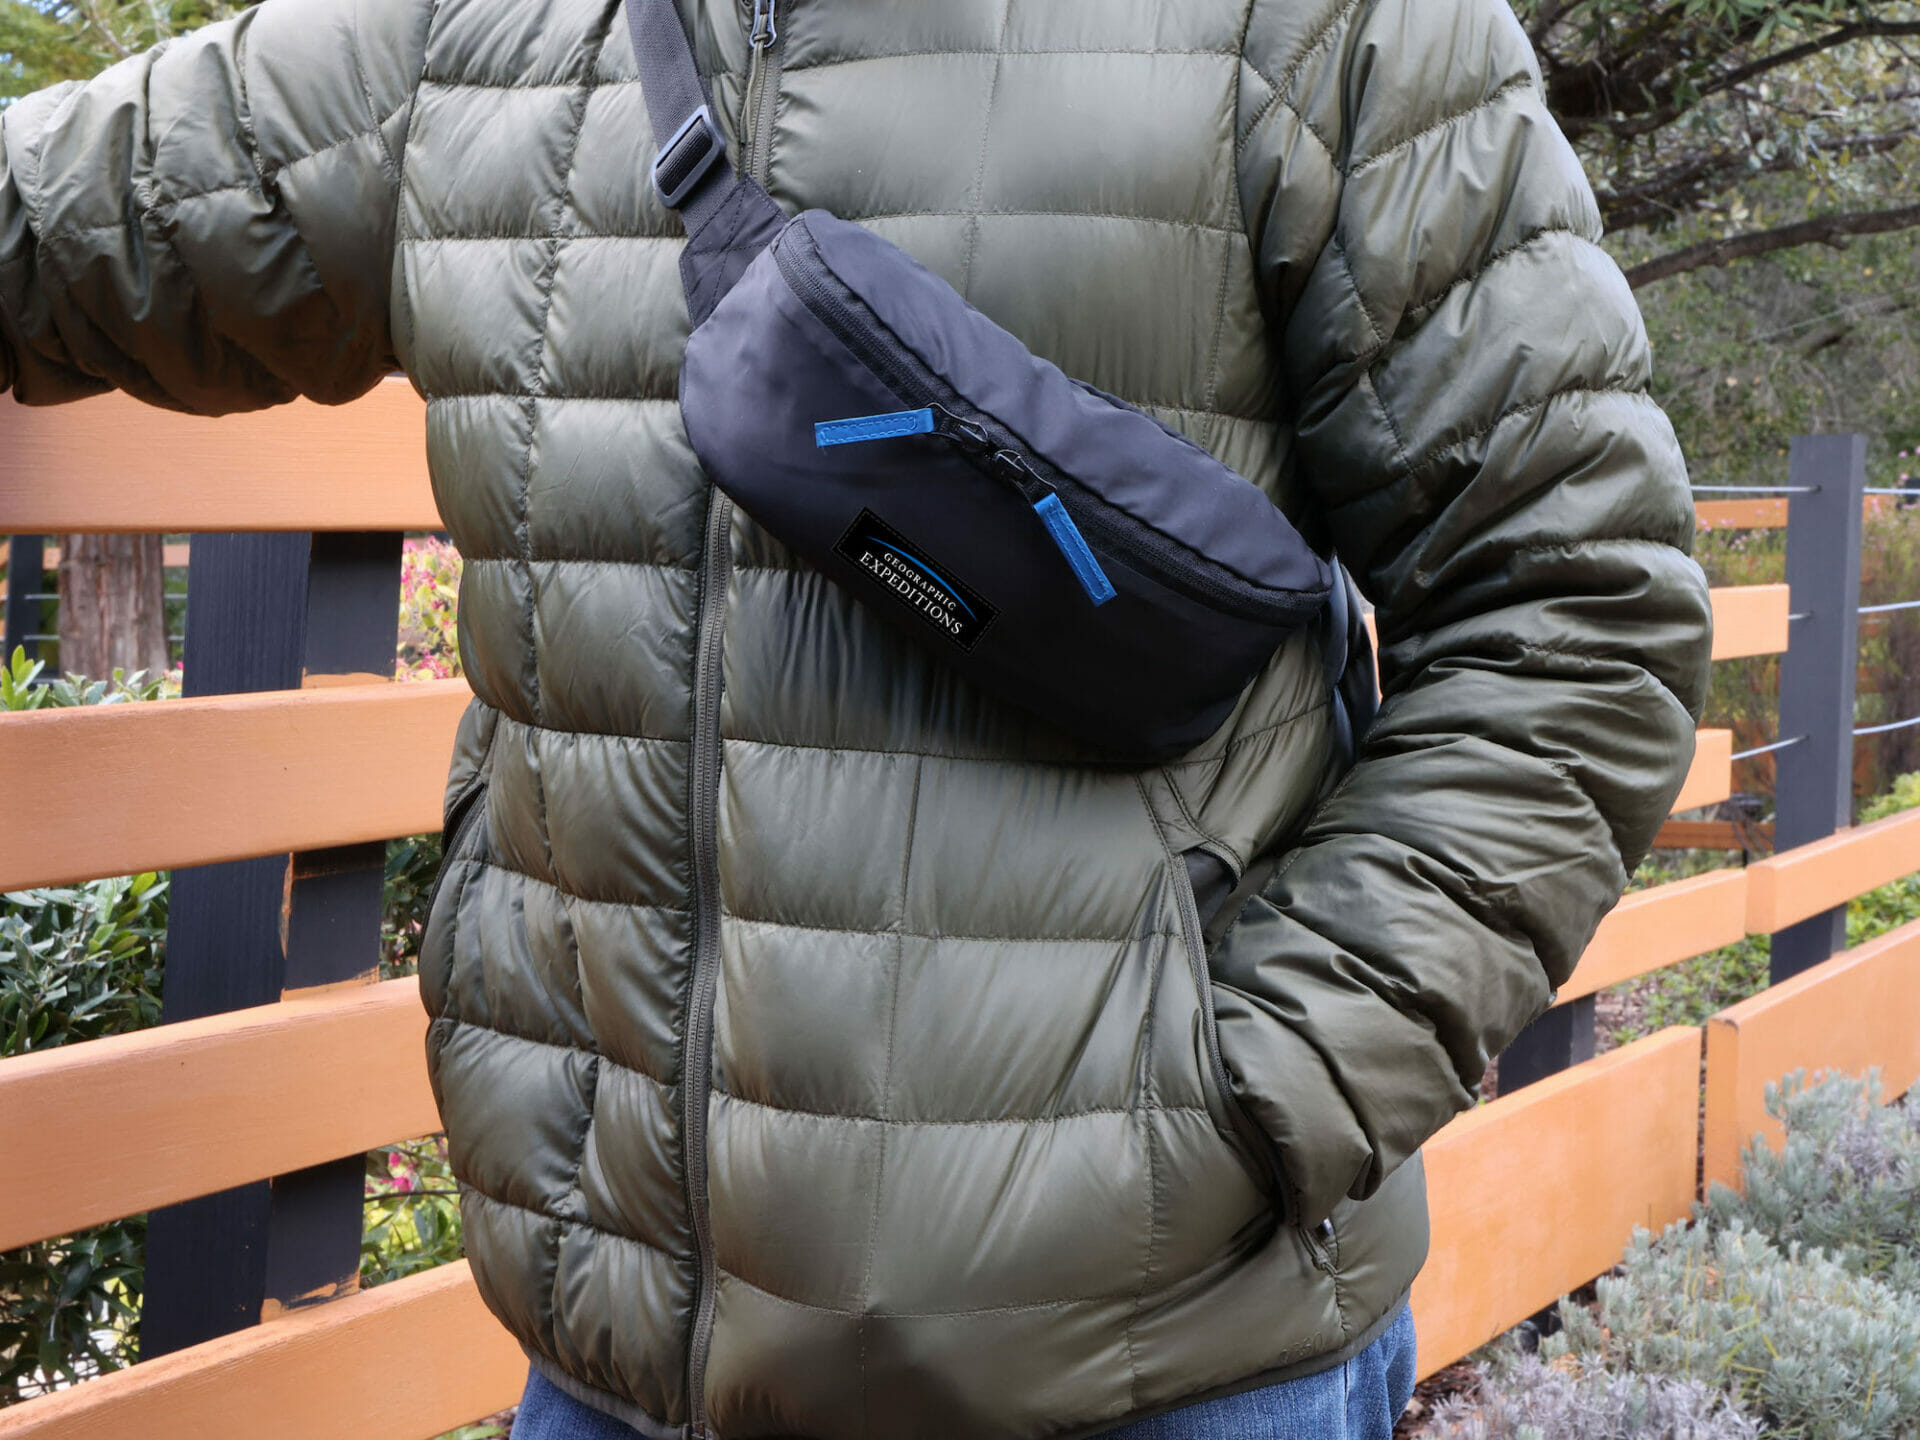 A crossbody bag is worn across the chest of a traveler in a winter coat.